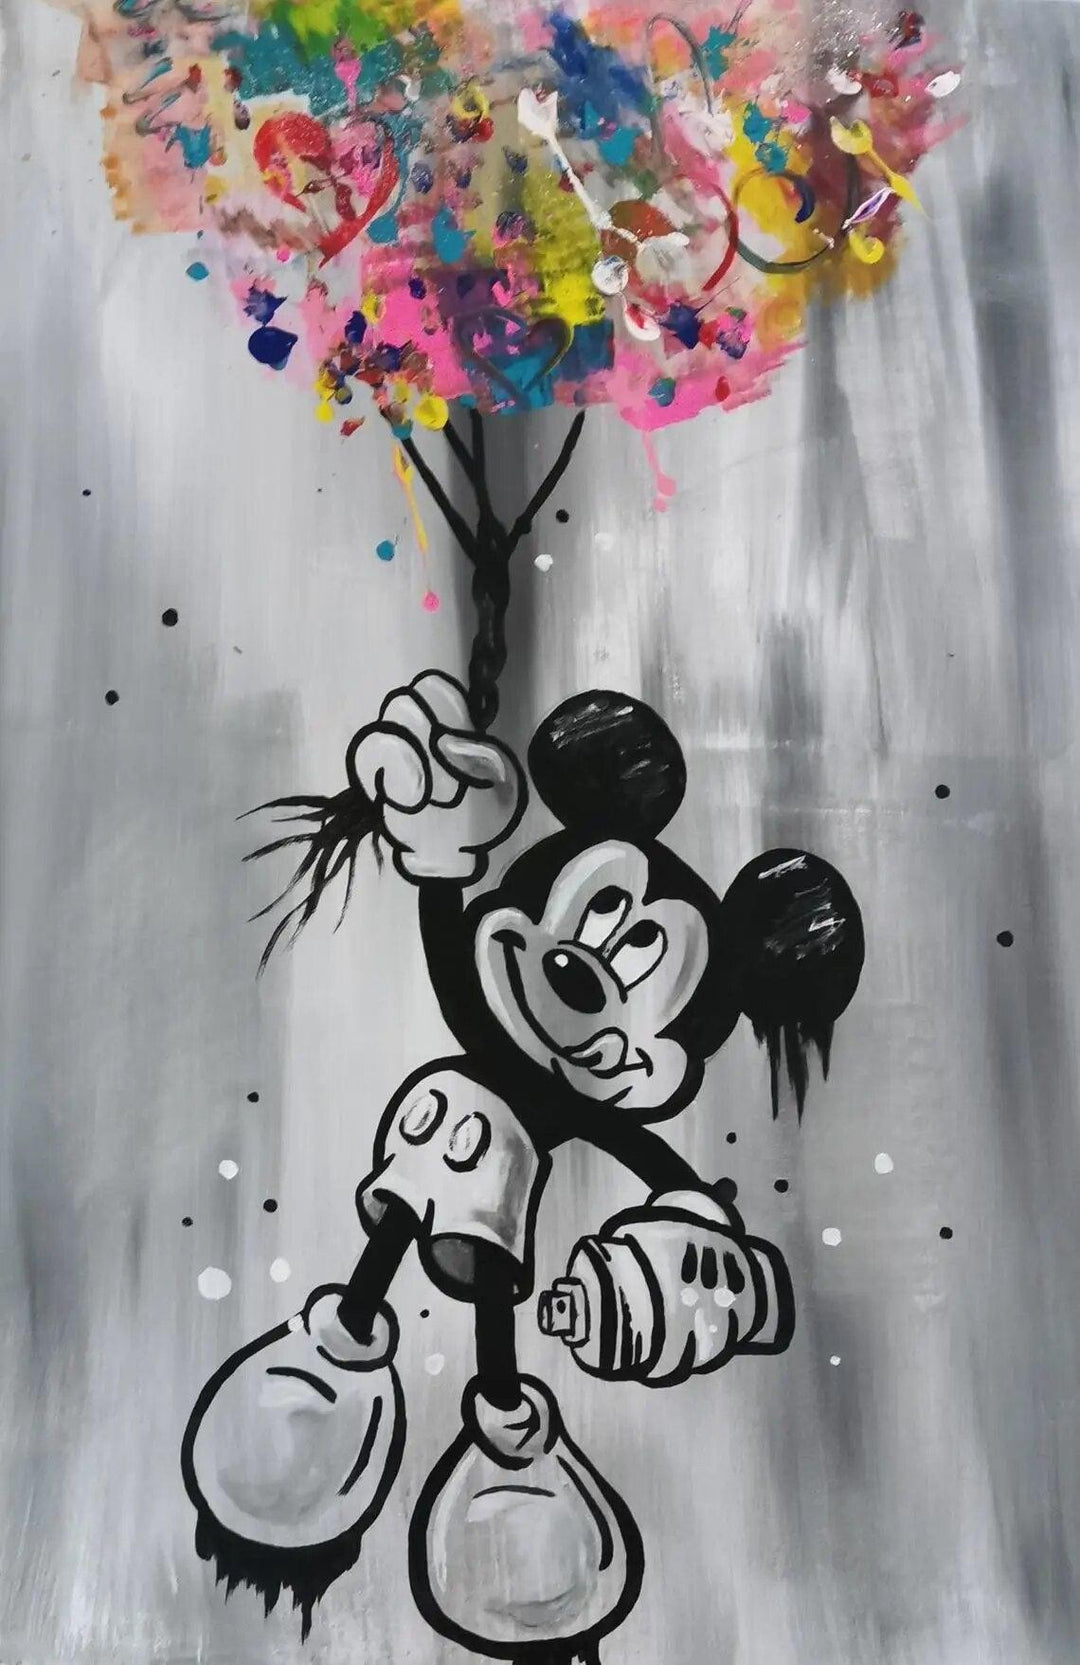 Disney Anime Poster Street Graffiti Art Painting Pop Art Canvas Print Wall Art Mickey Mouse with Colors Balloon Picture Kid Room - Brand My Case